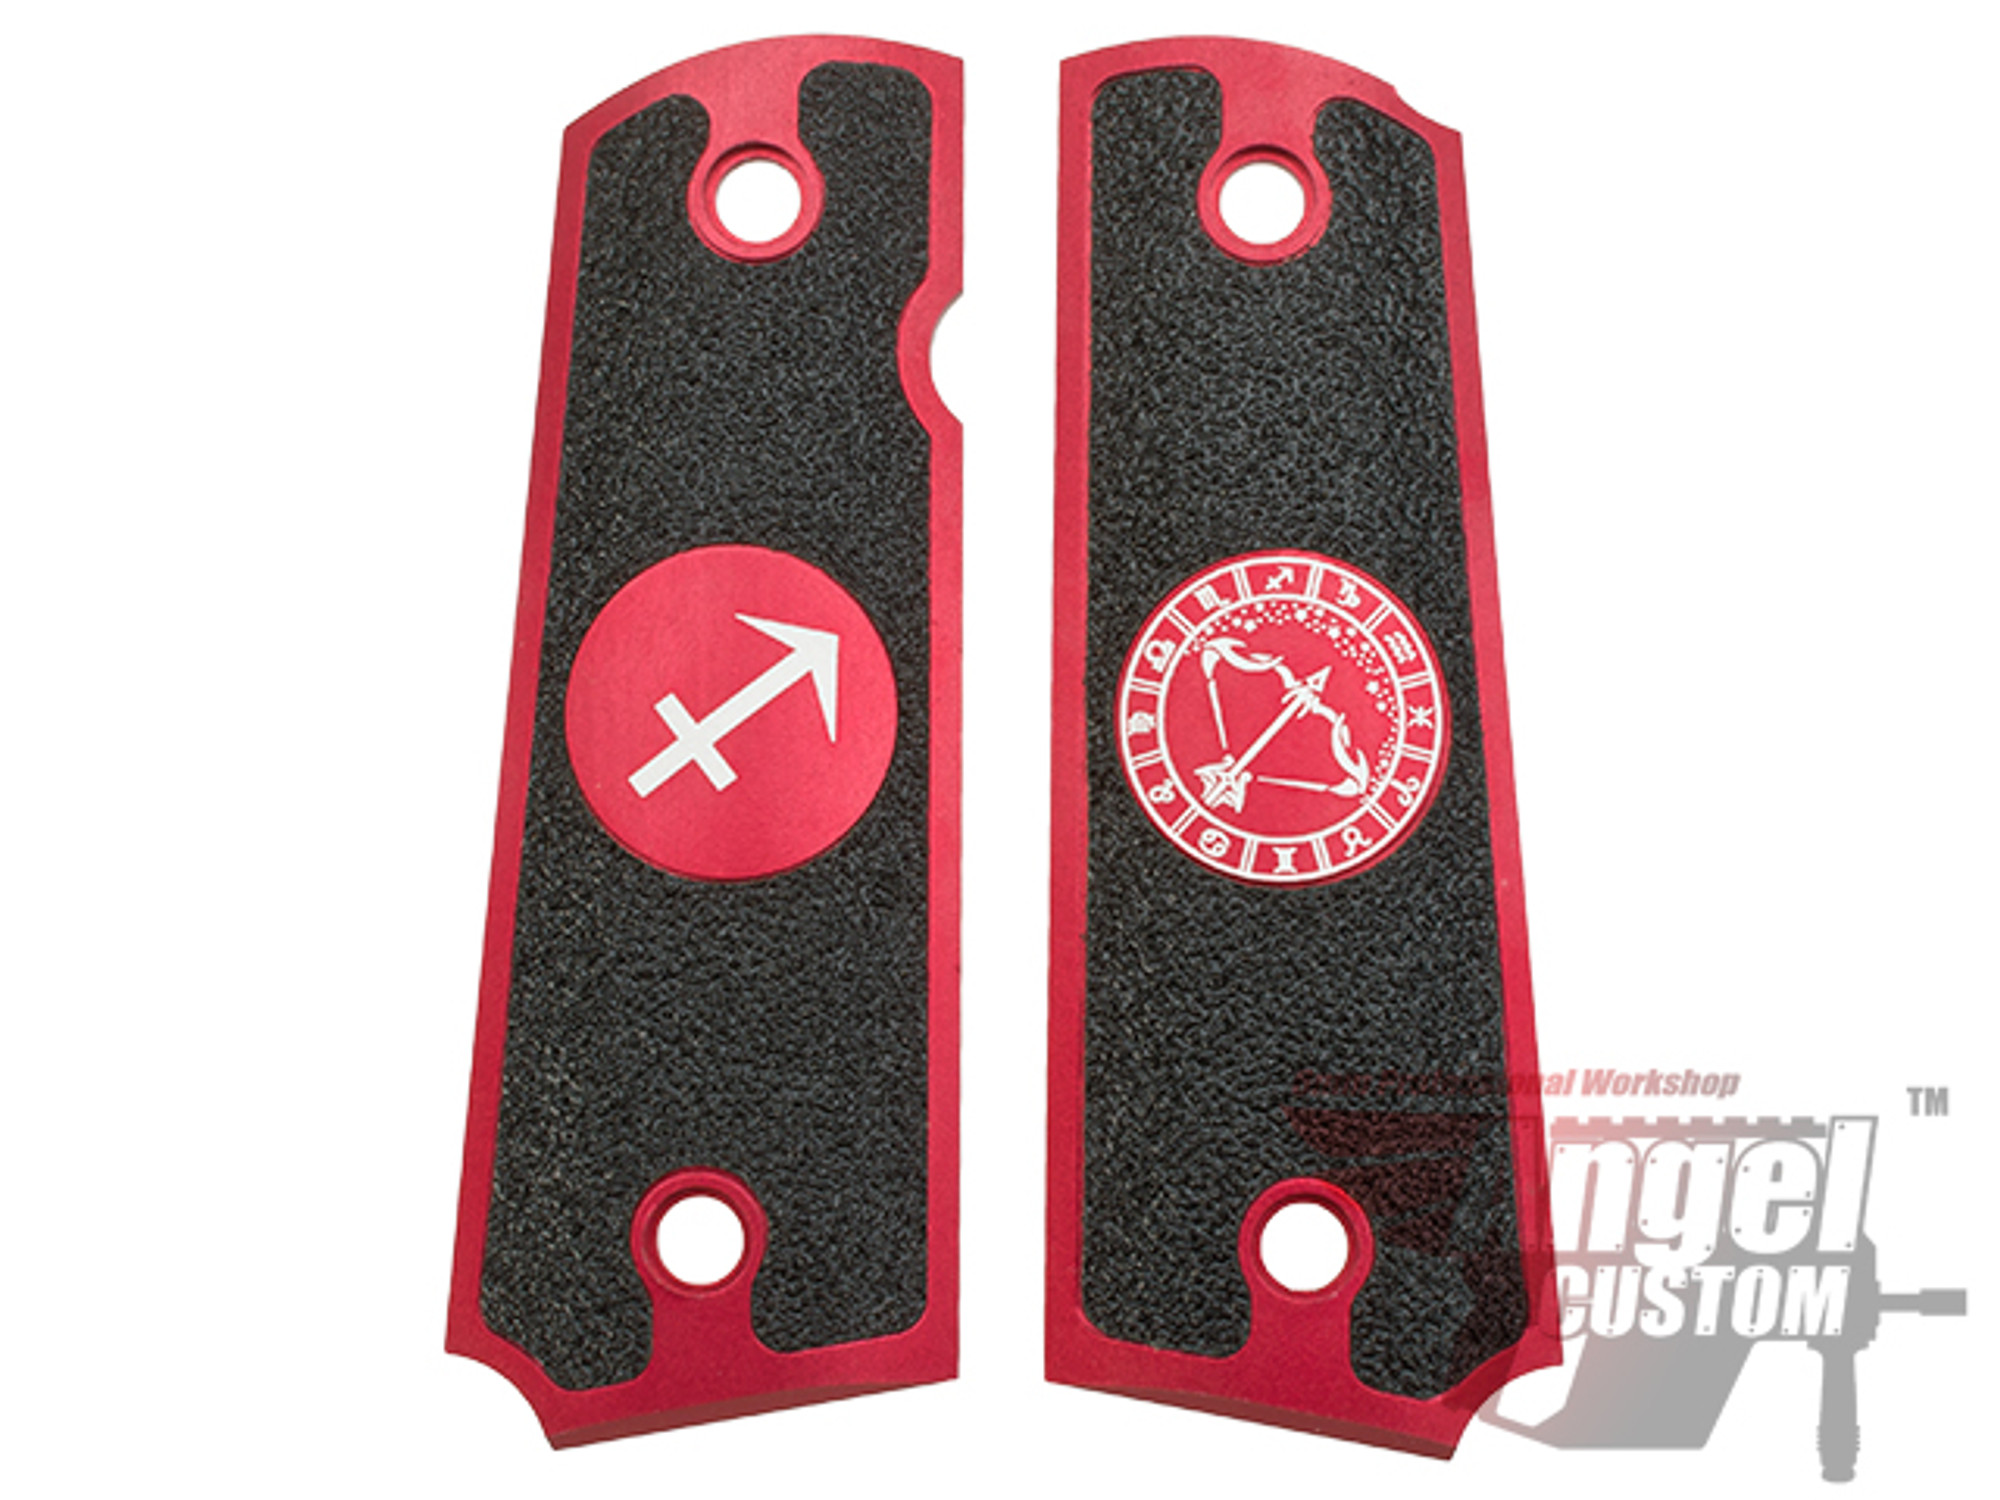 Angel Custom CNC Machined Tac-Glove "Zodiac" Grips for WE-Tech 1911 Series Airsoft Pistols - Red (Sign: Sagittarius)